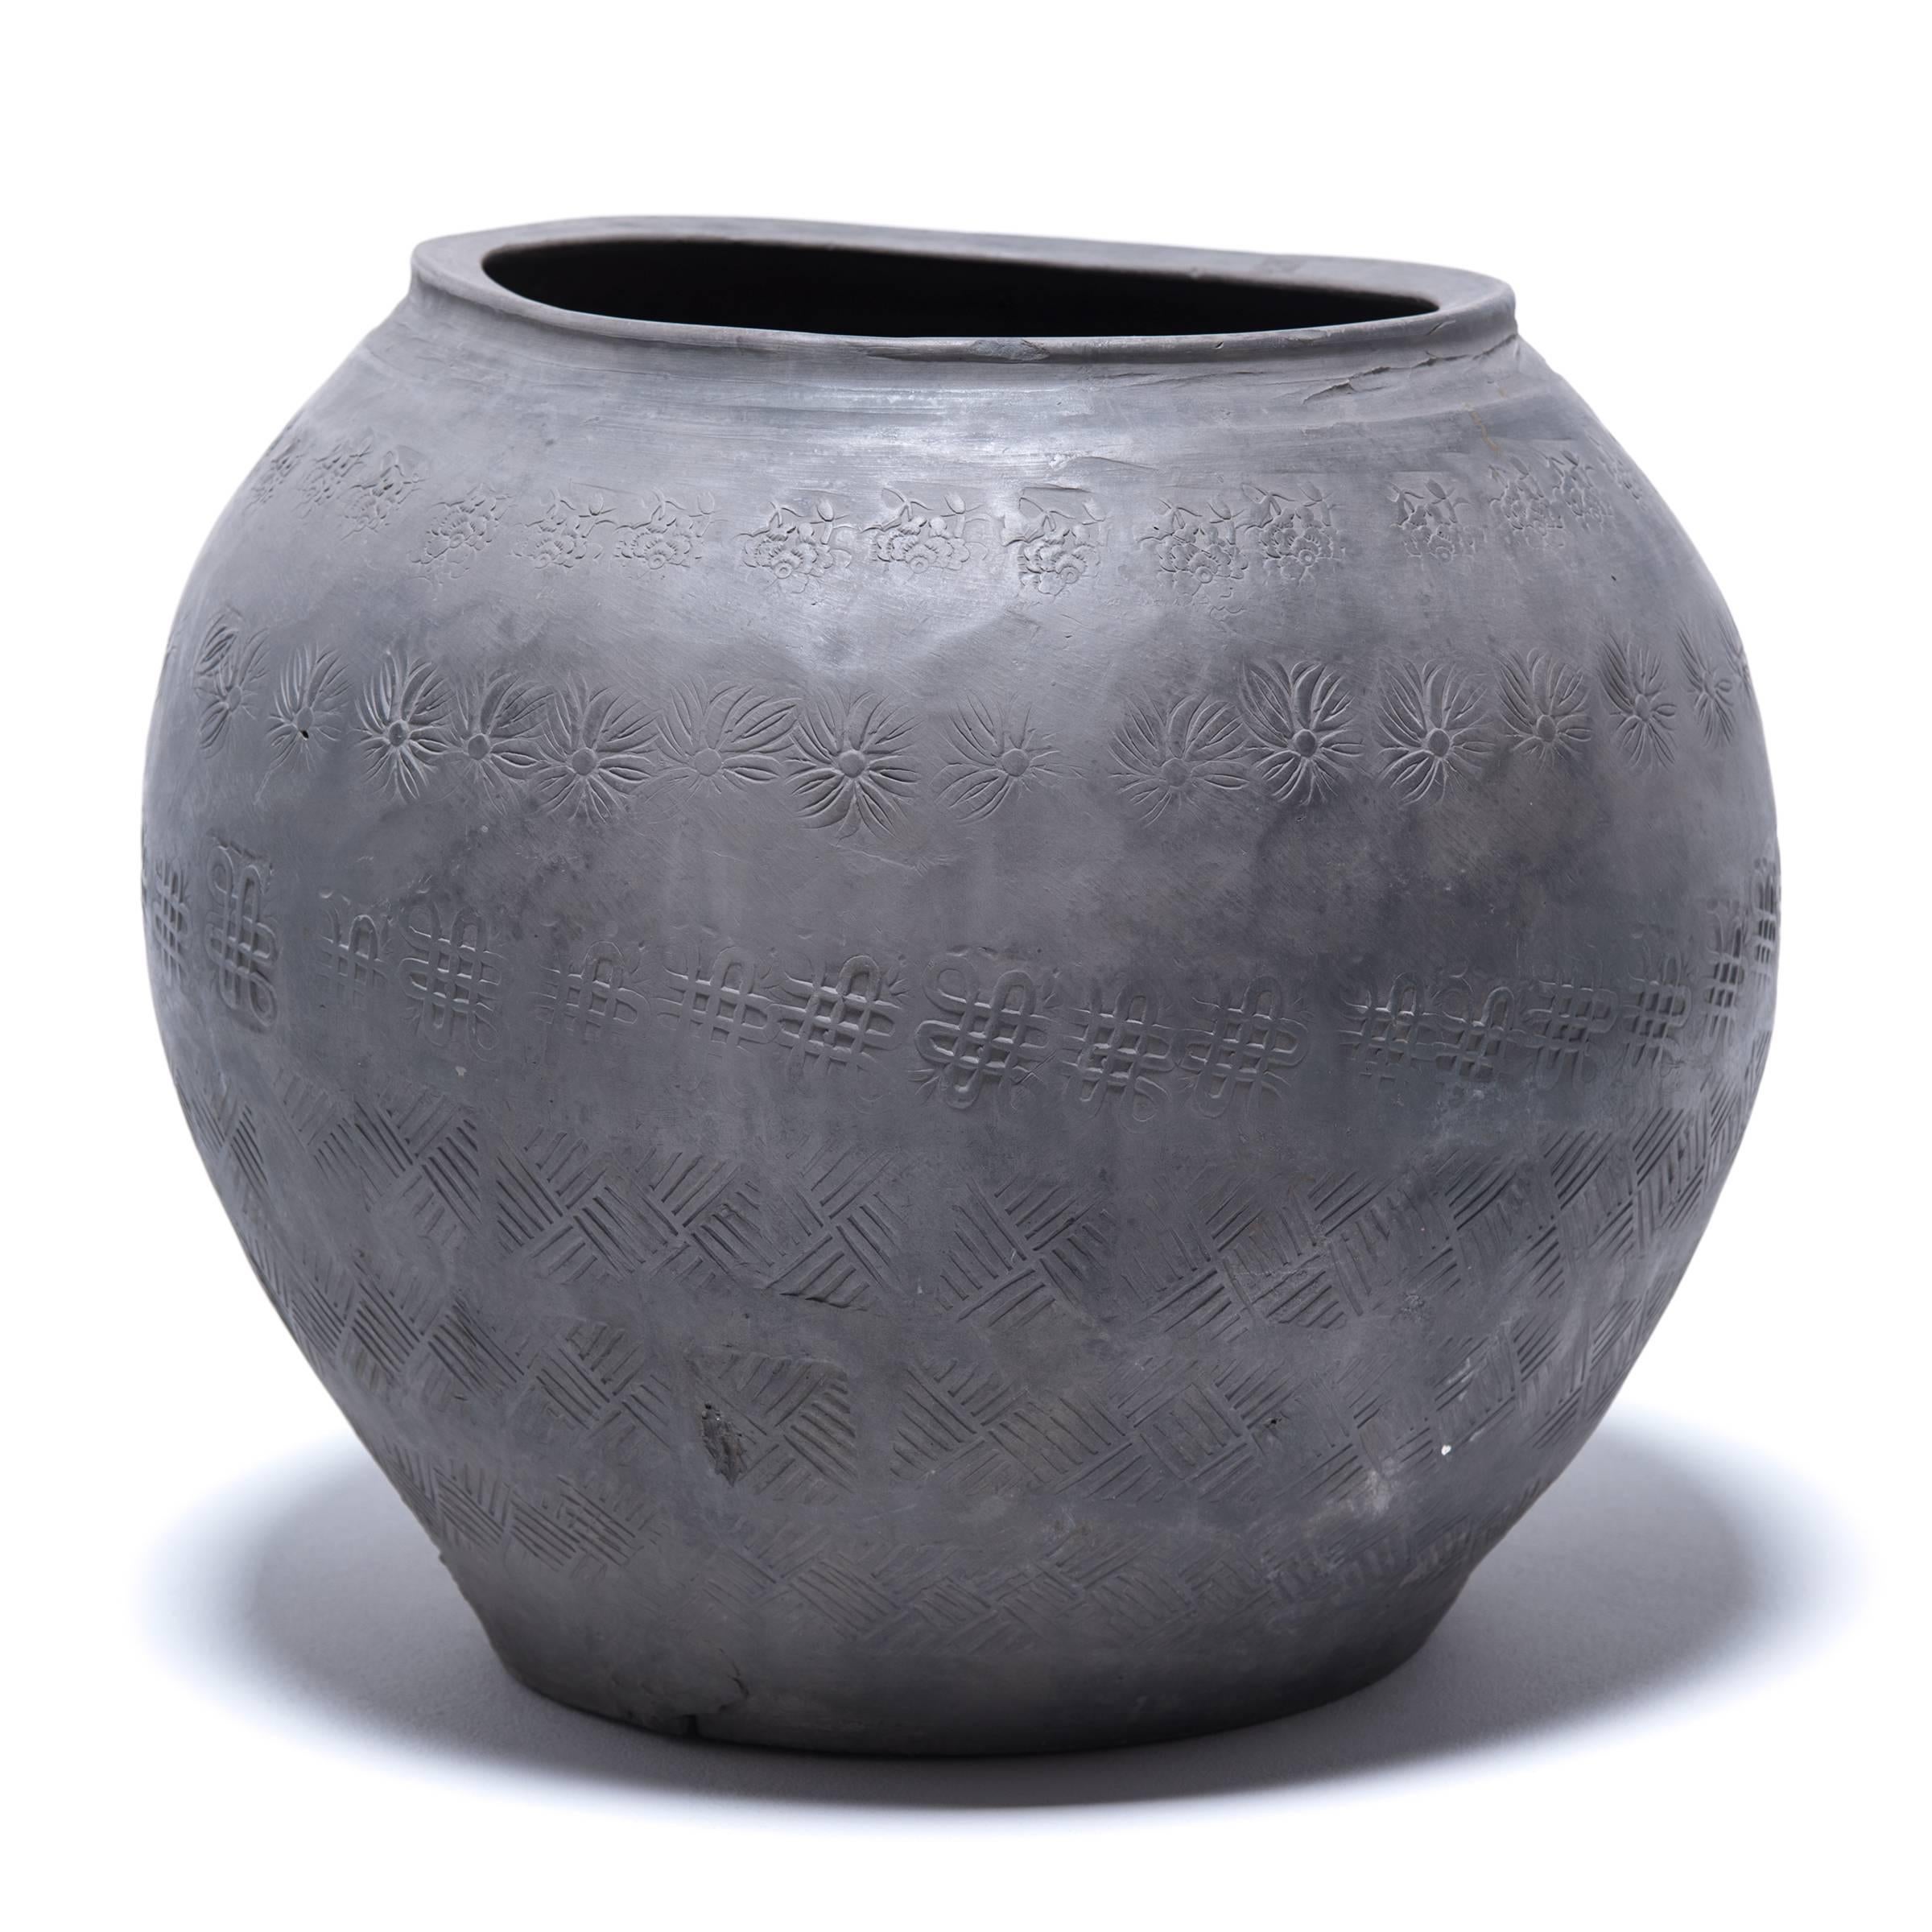 Chinese Stamped Clay Jar